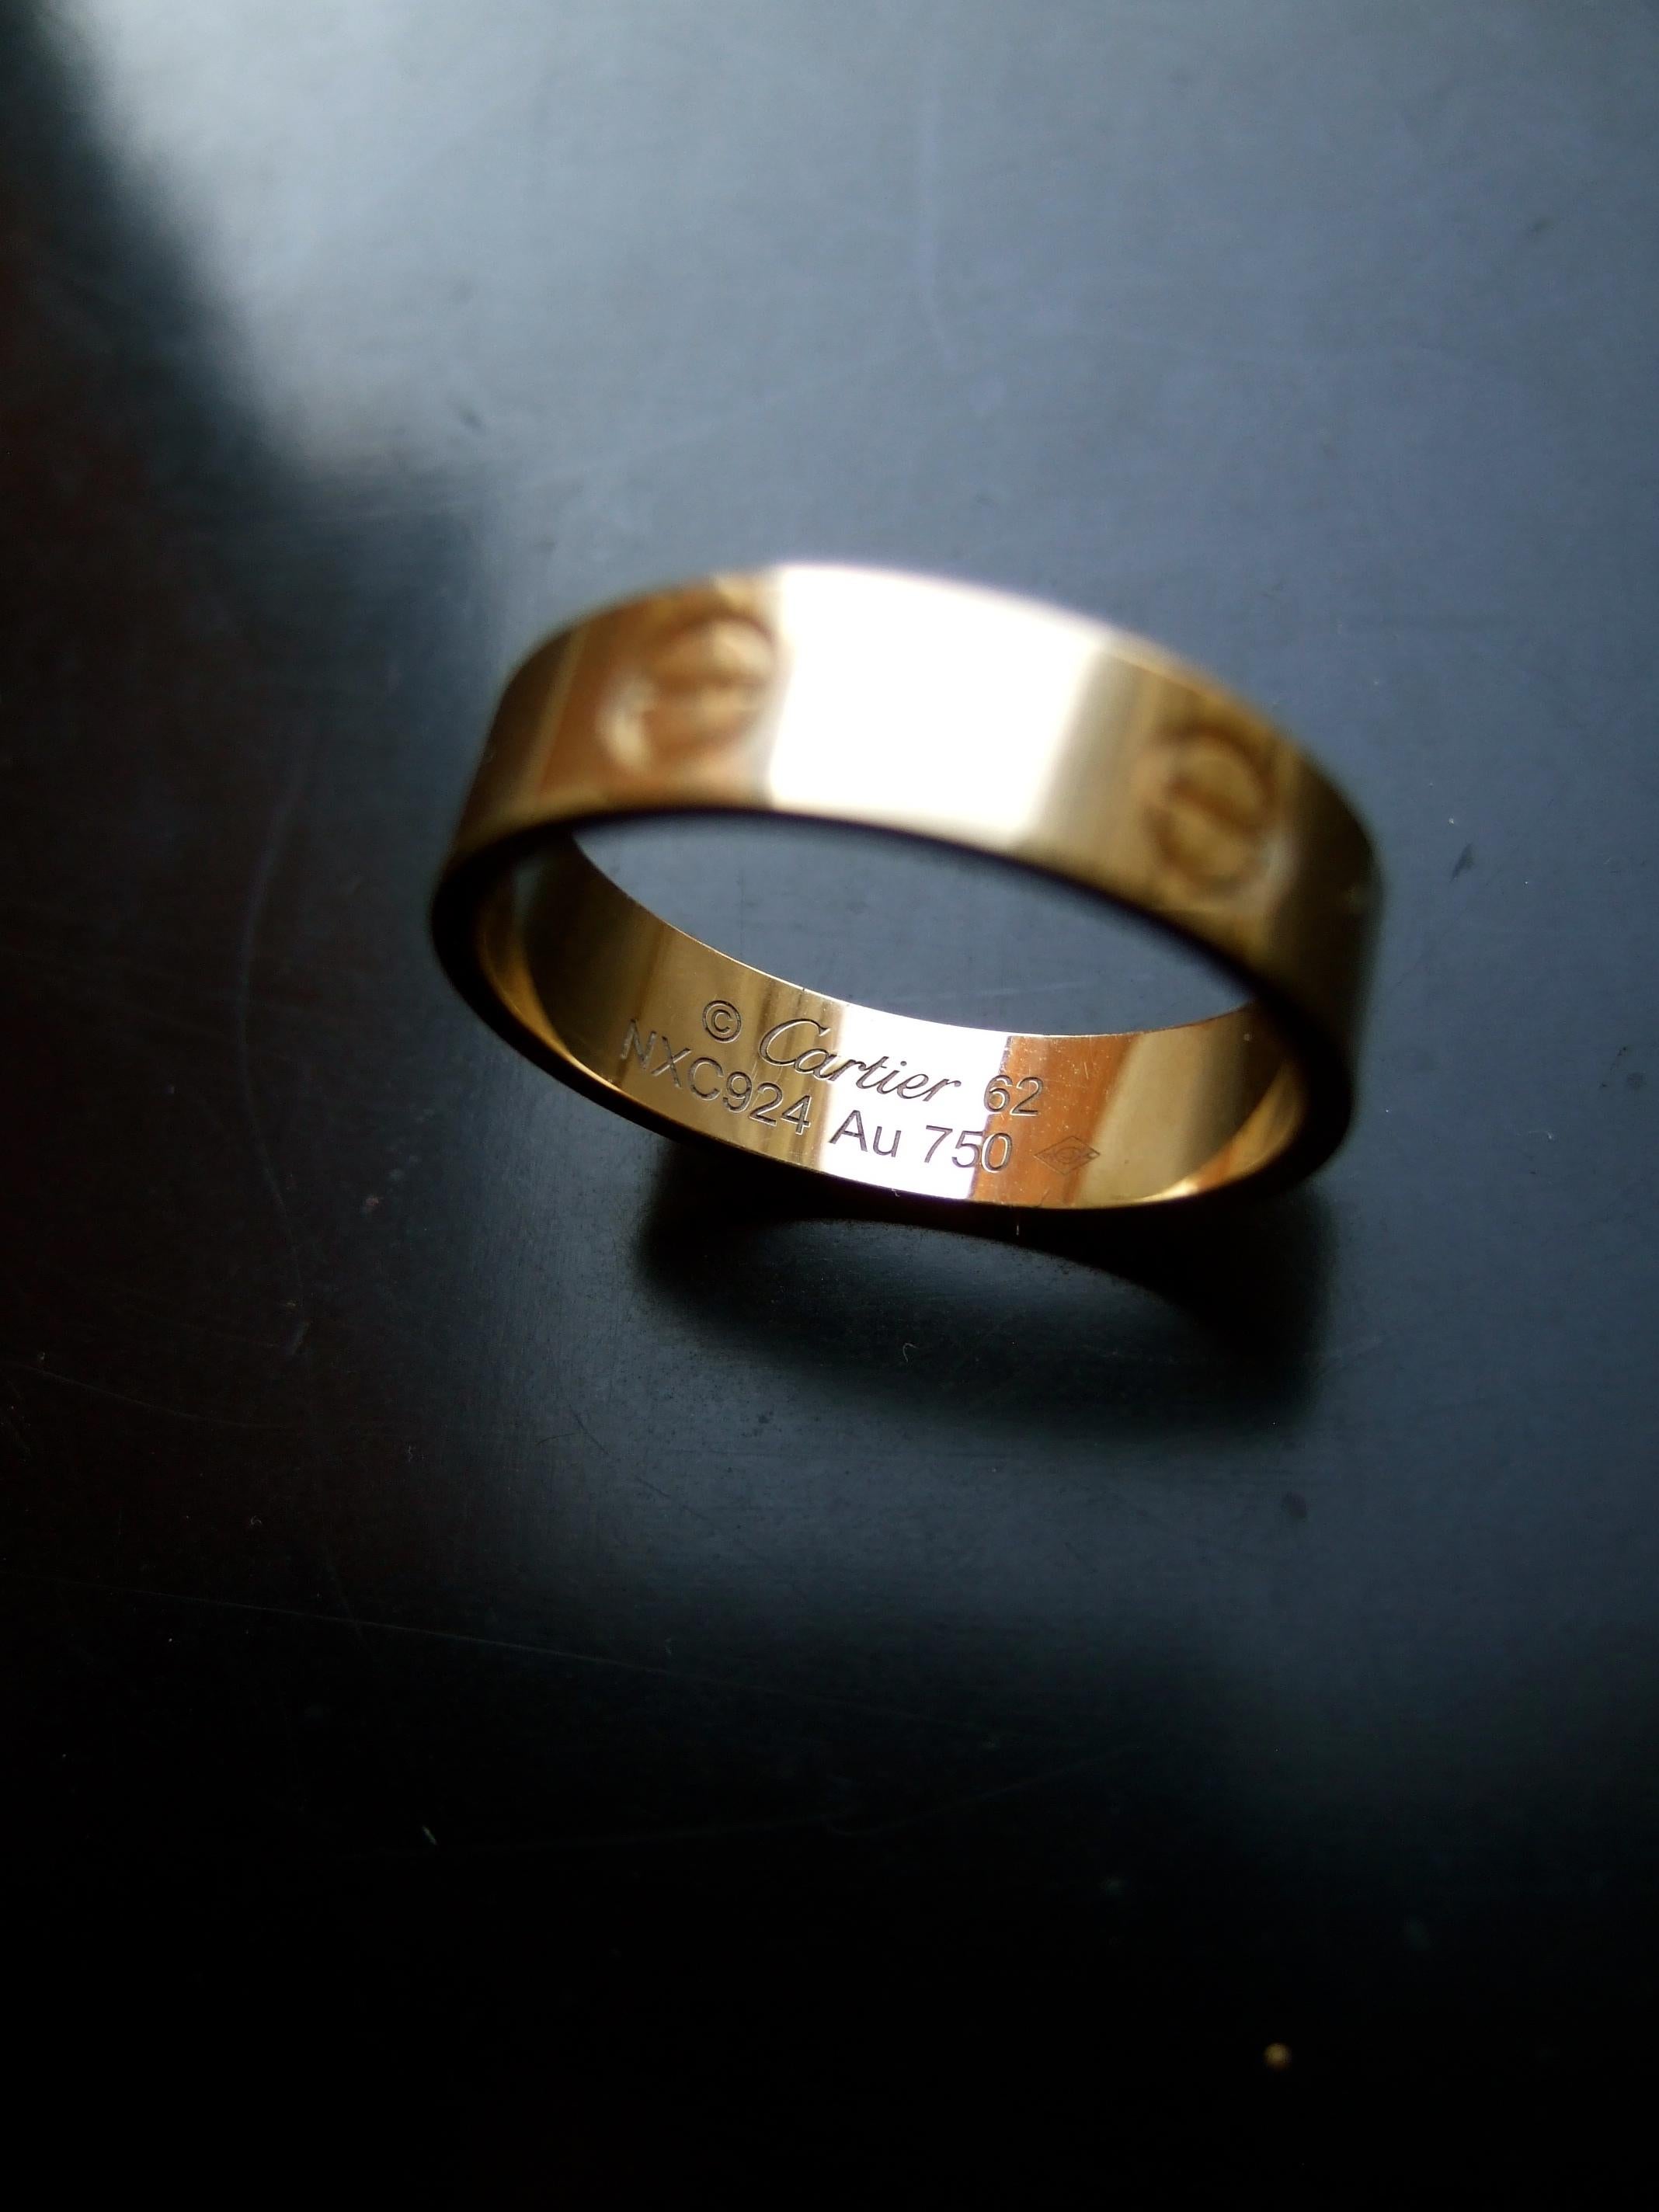 Cartier Yellow Gold 18kt Love Band Ring New in Cartier Box US Size 10 c 21st c  4